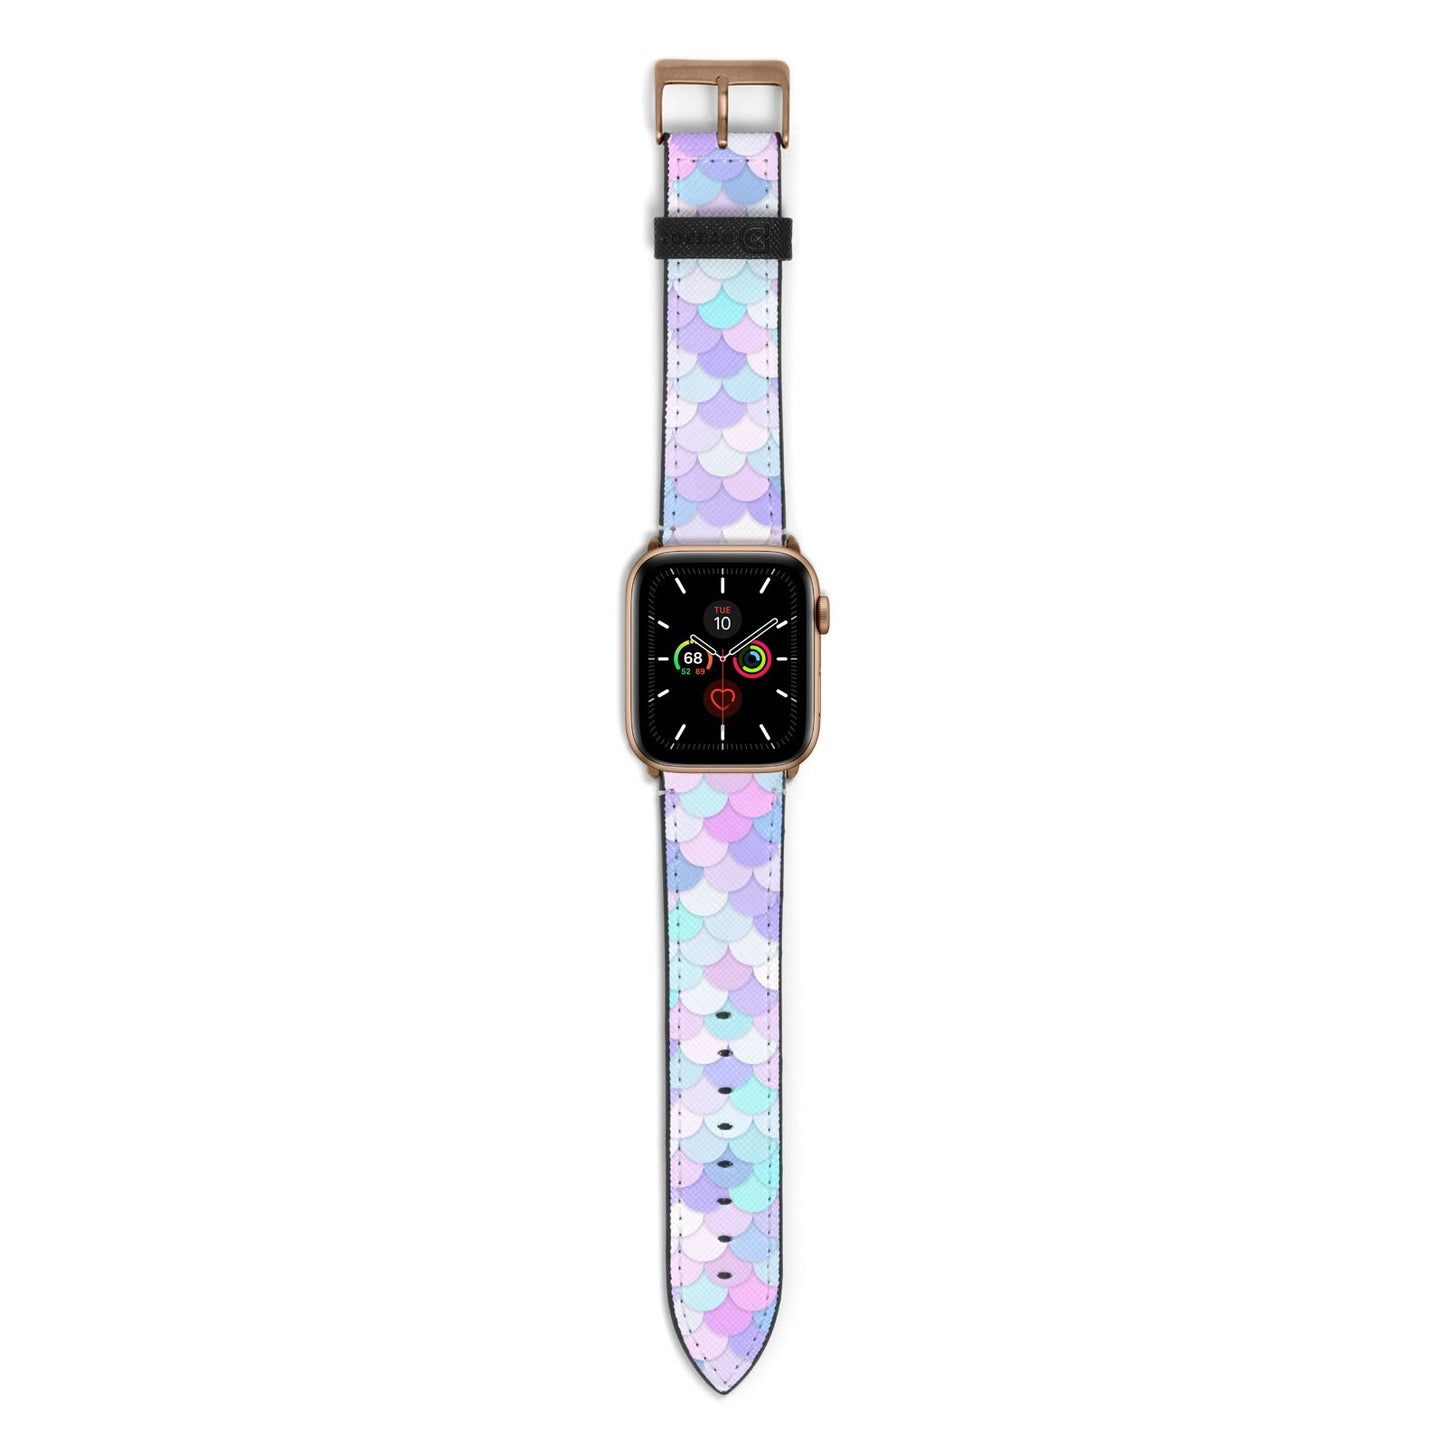 Mermaid Apple Watch Strap with Gold Hardware